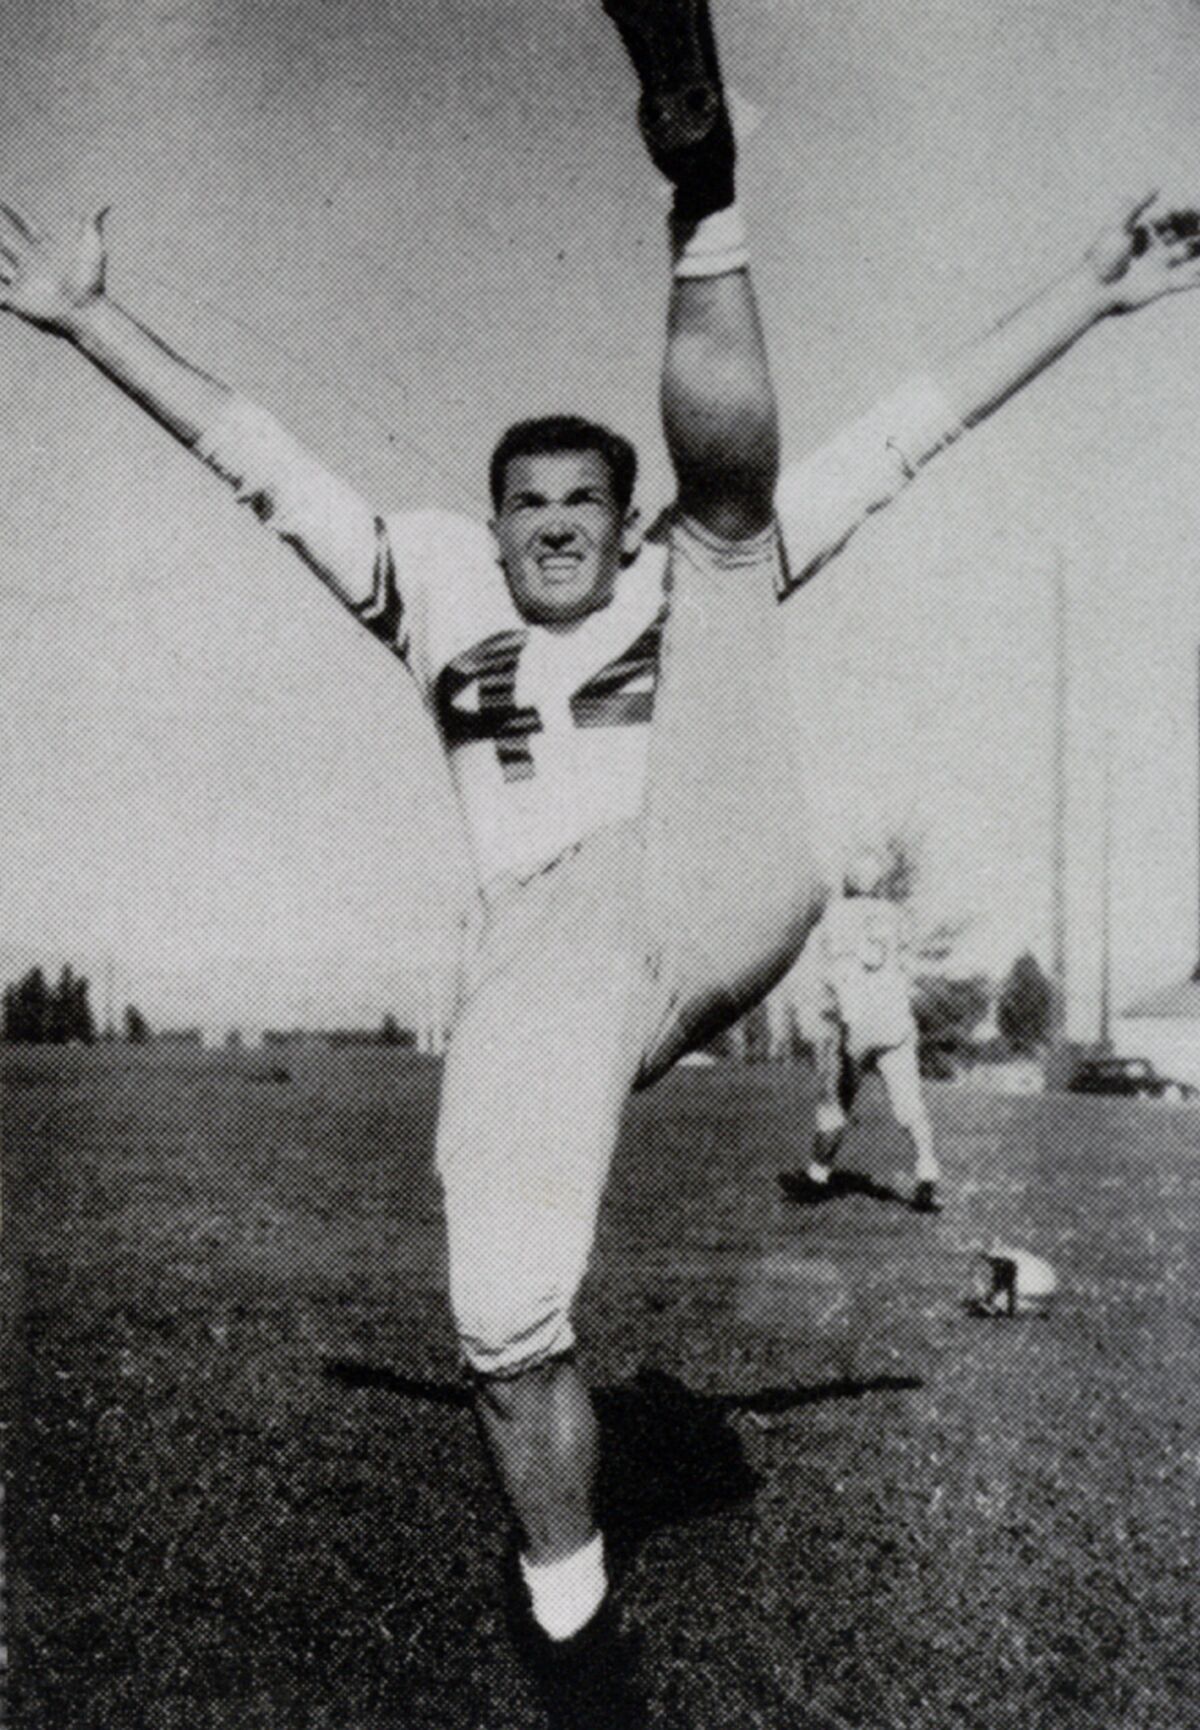 Nevada quarterback Pat Brady had a strong arm, but proved in 1950 that he had a powerful left leg as well.